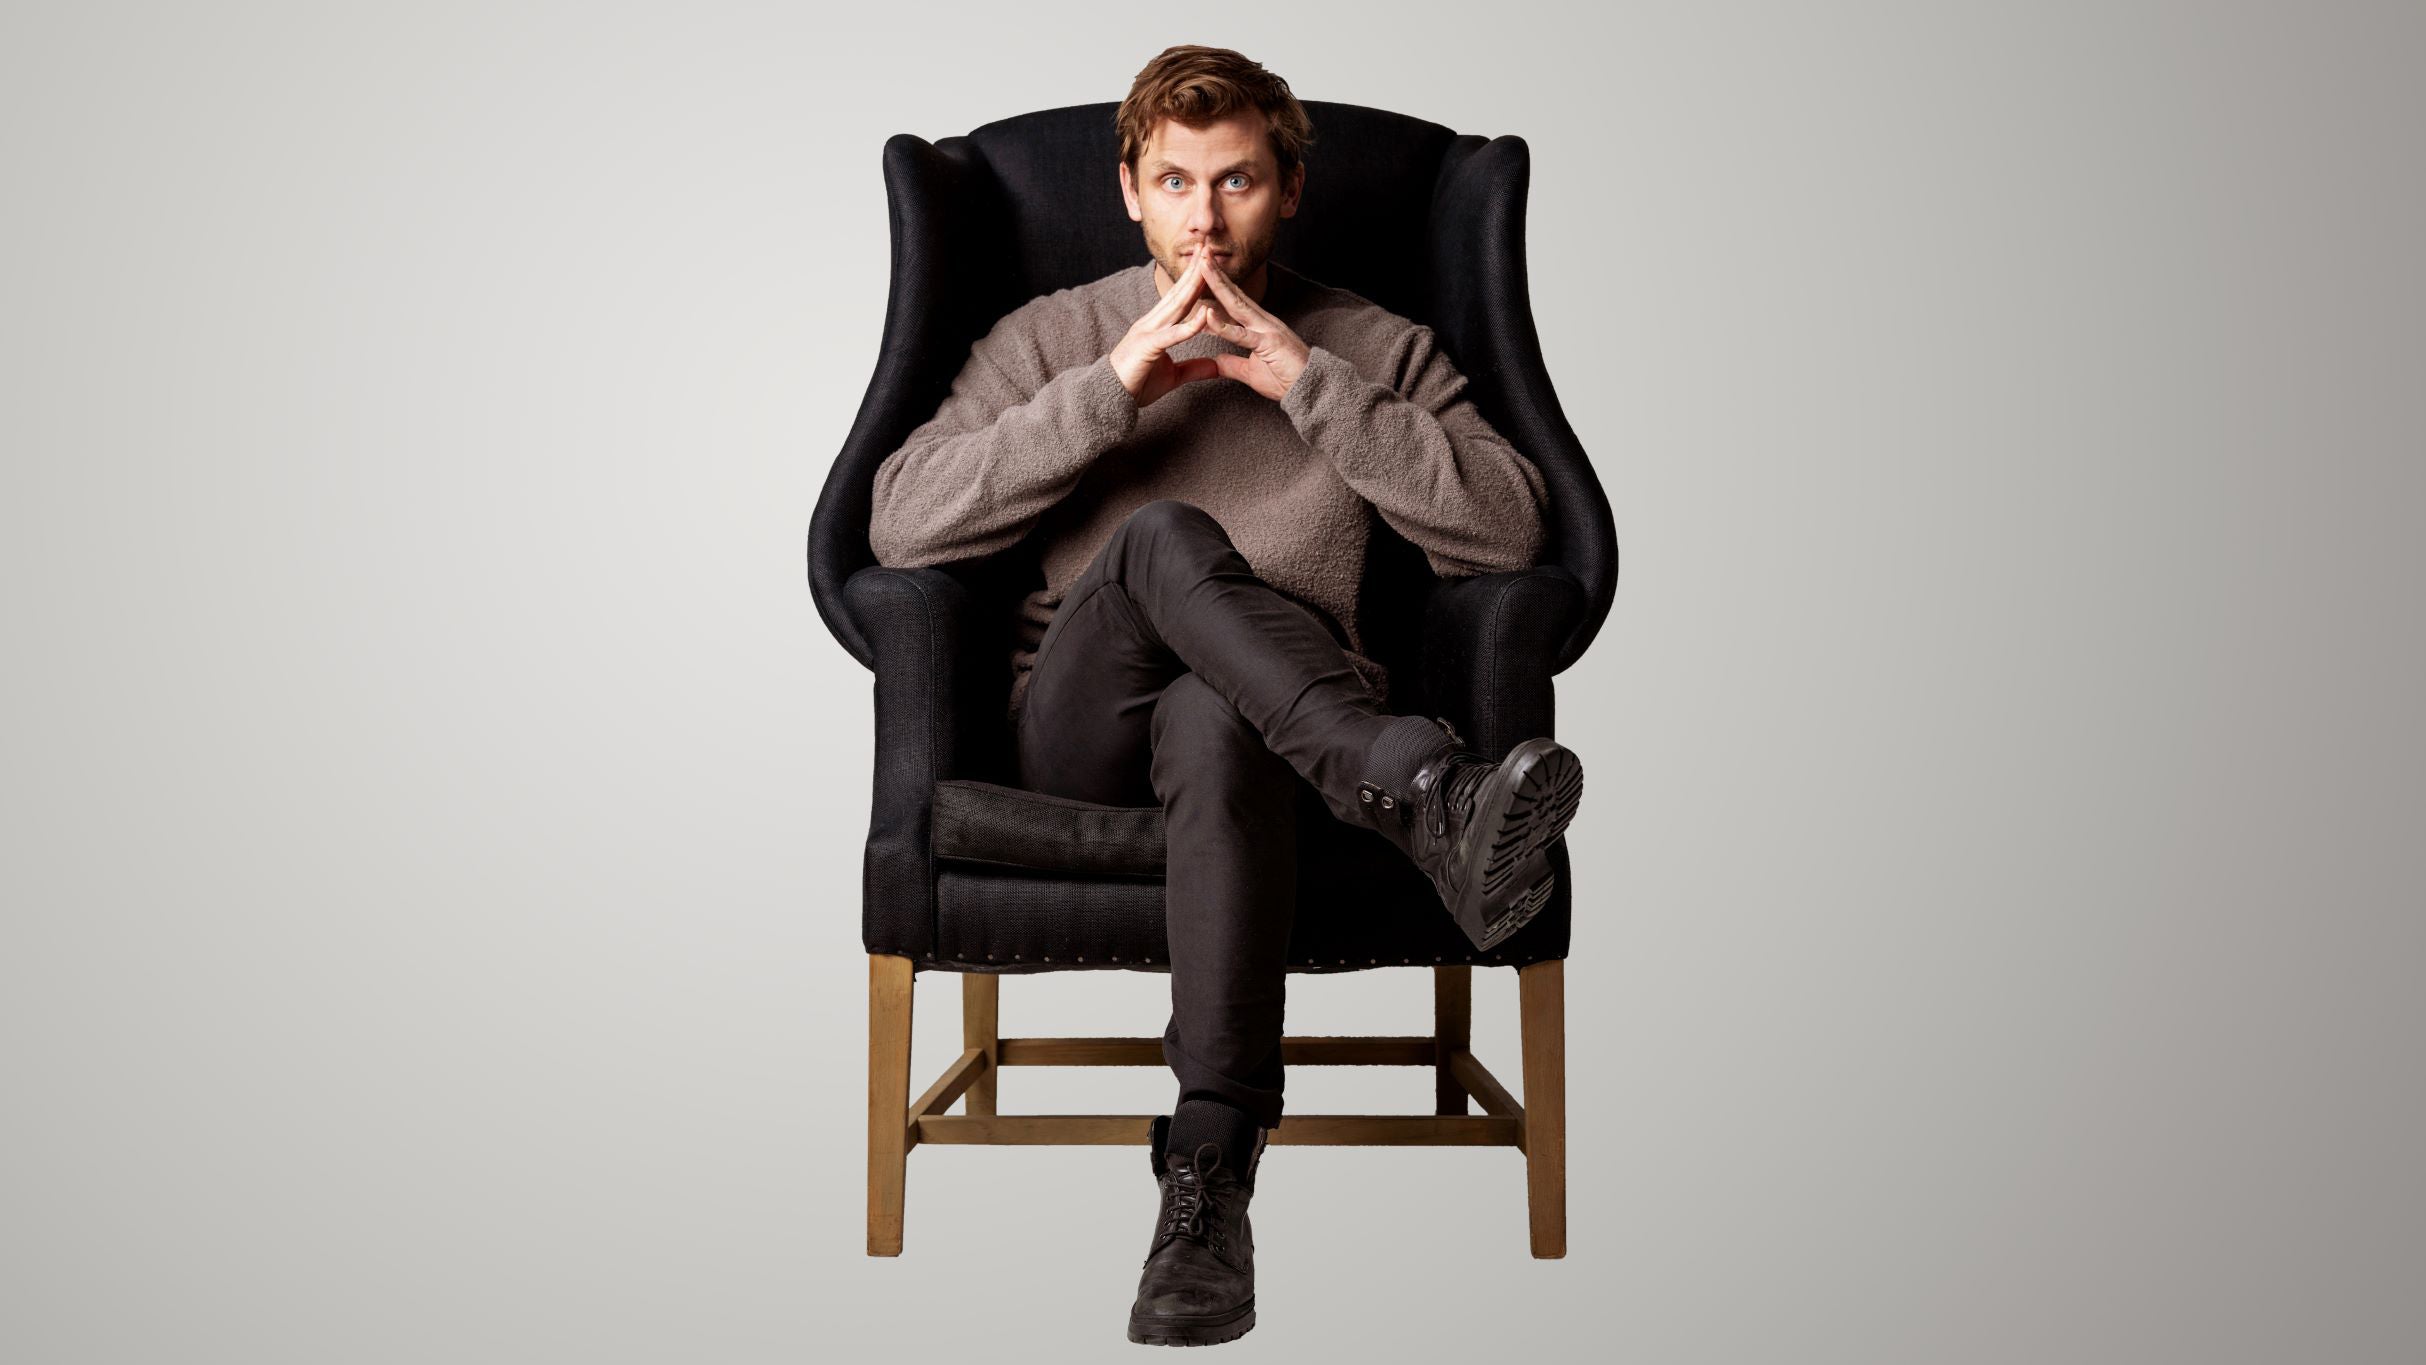 Charlie Berens at Orpheum Theatre Sioux City - Sioux City, IA 51101